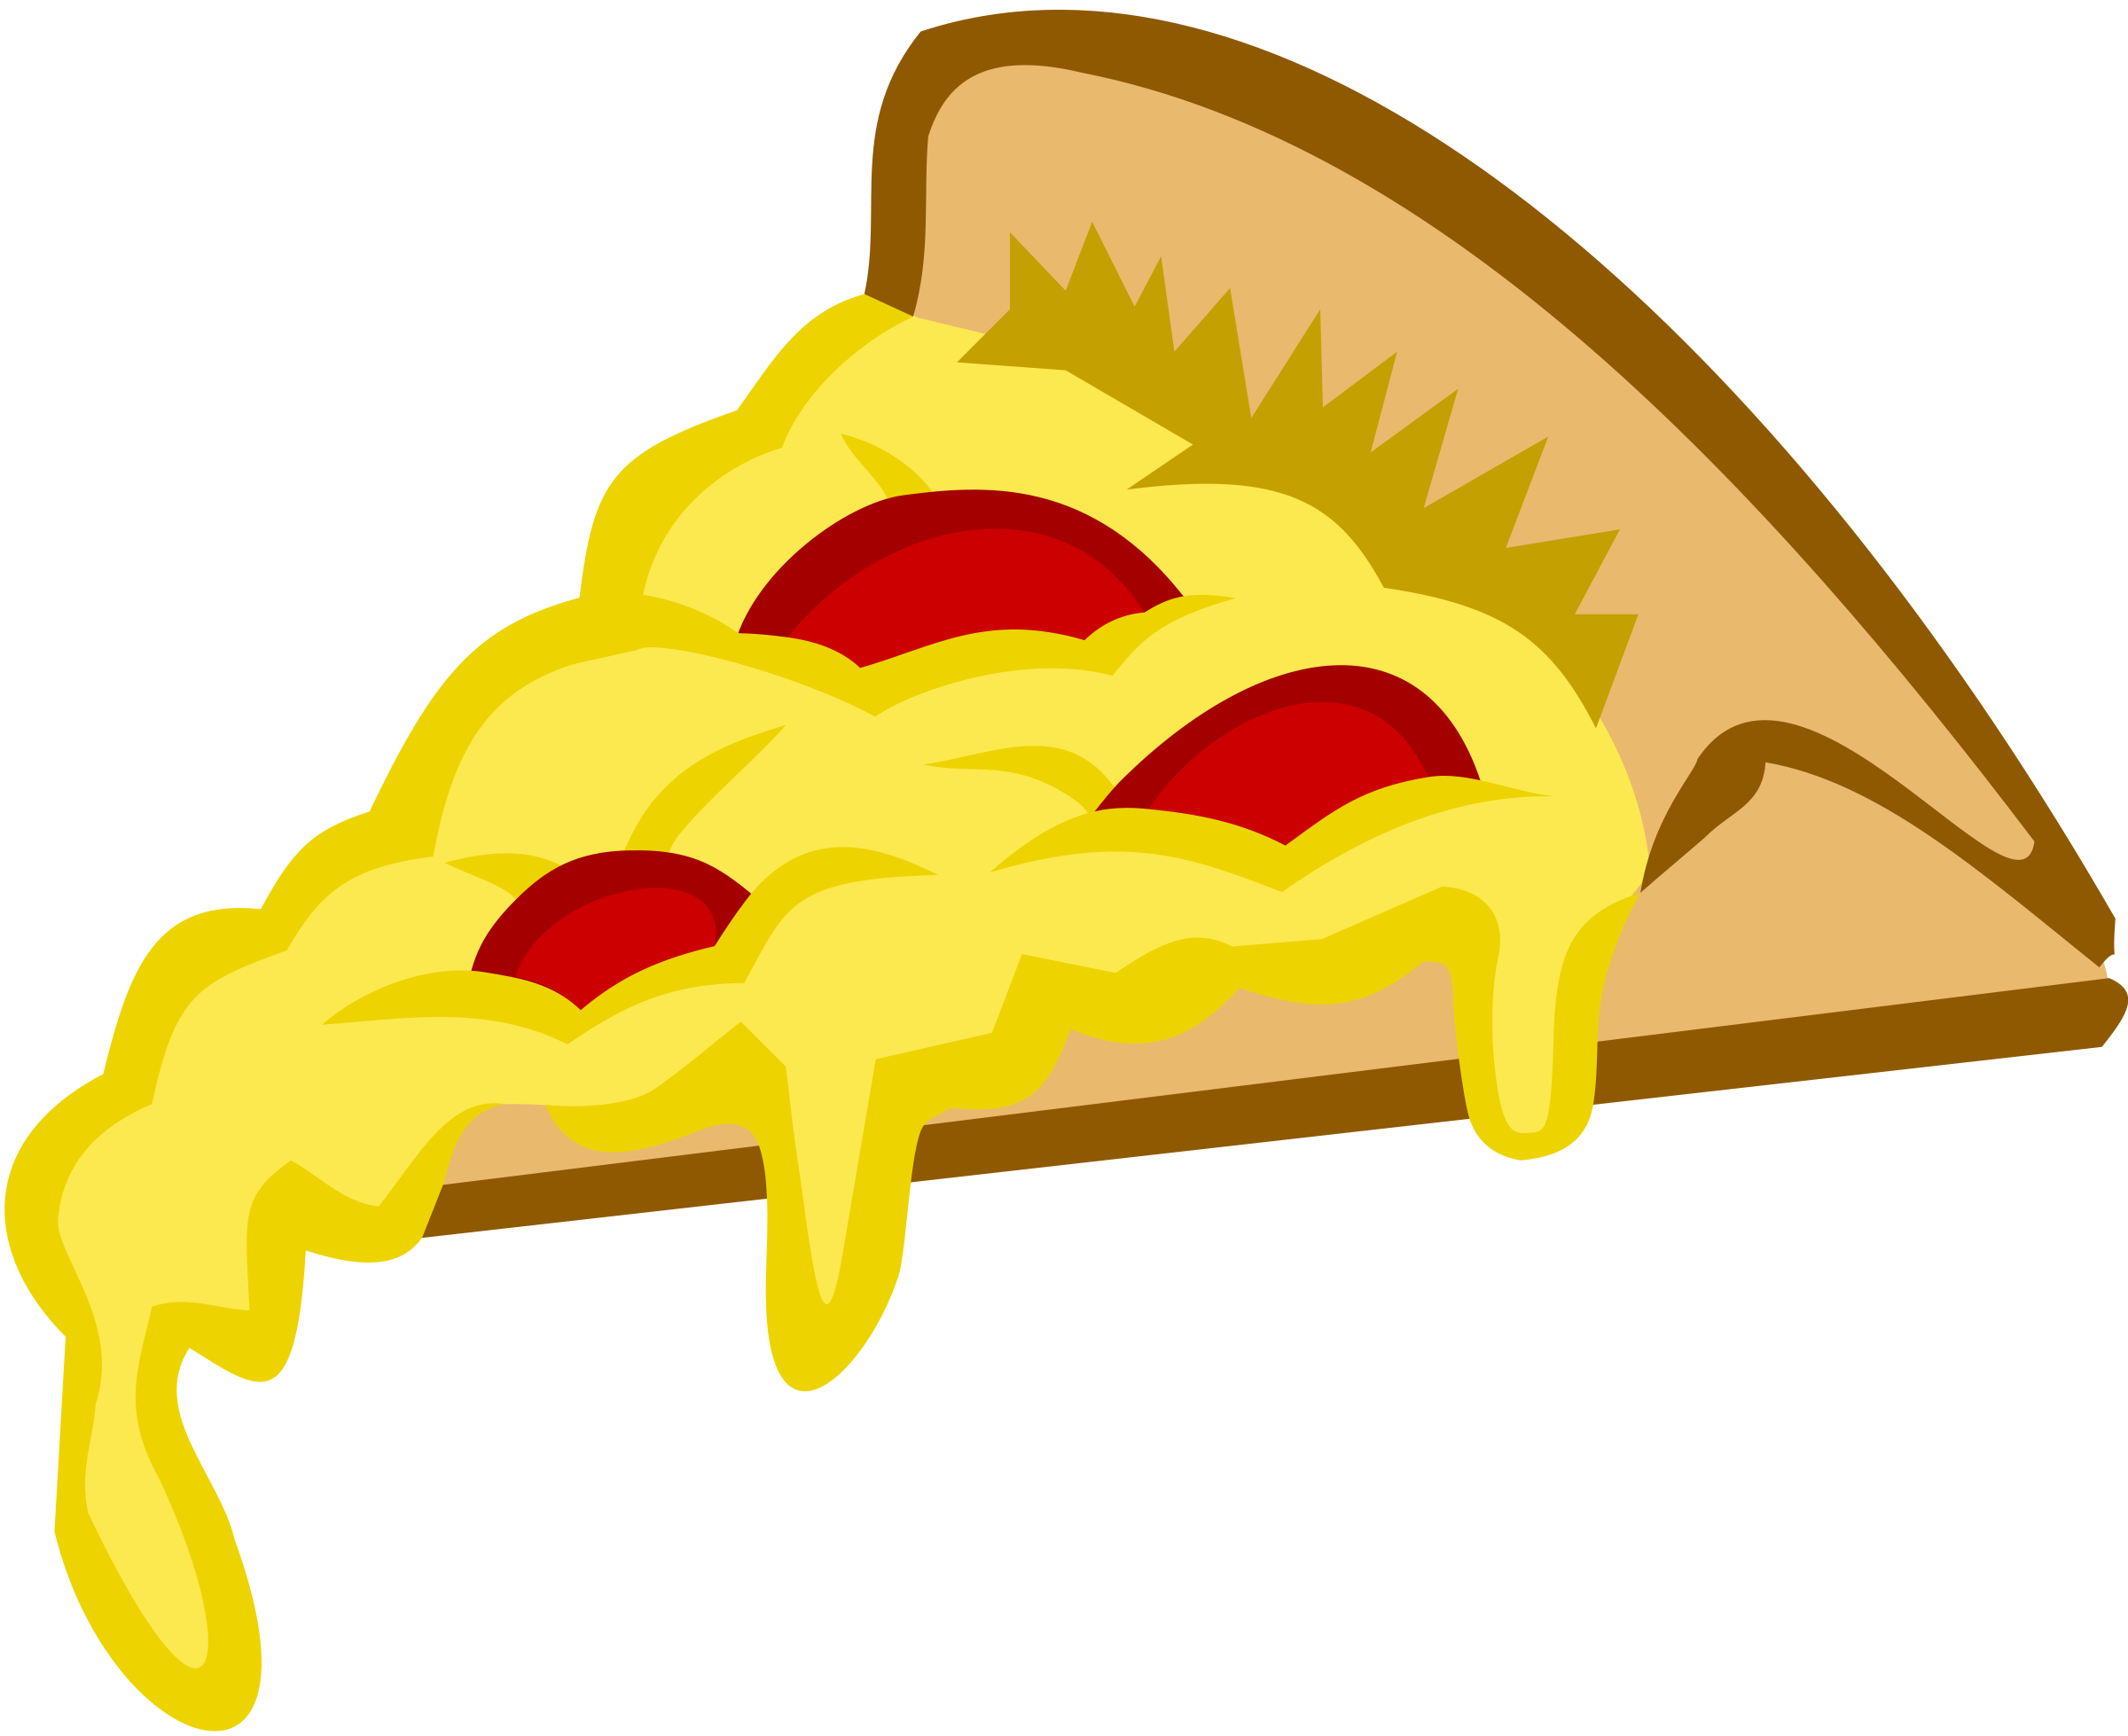 Free Cheese Pizza Clipart, Download Free Clip Art, Free Clip